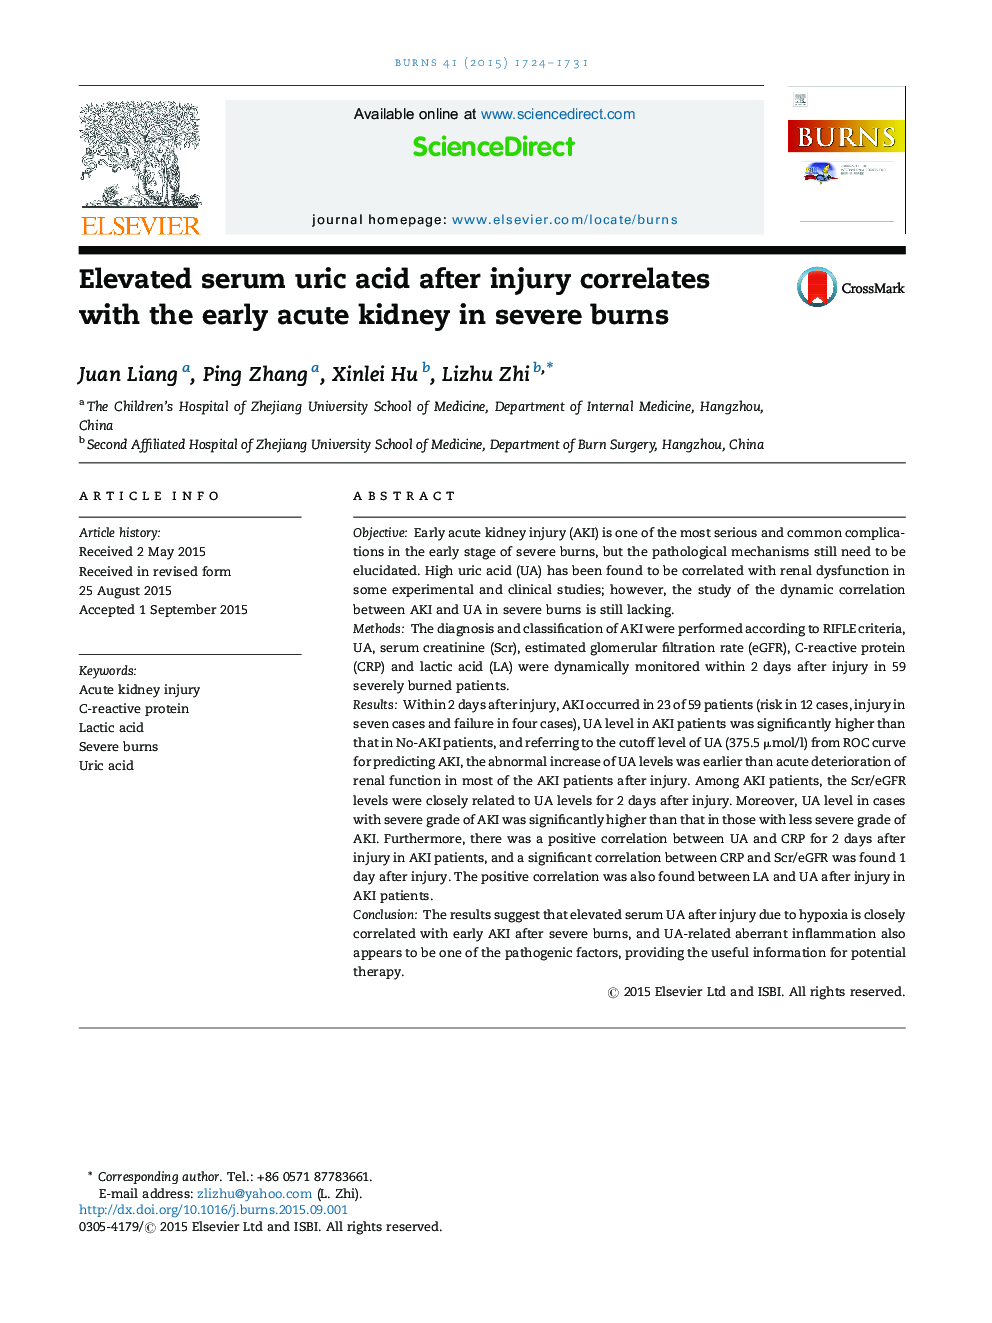 Elevated serum uric acid after injury correlates with the early acute kidney in severe burns